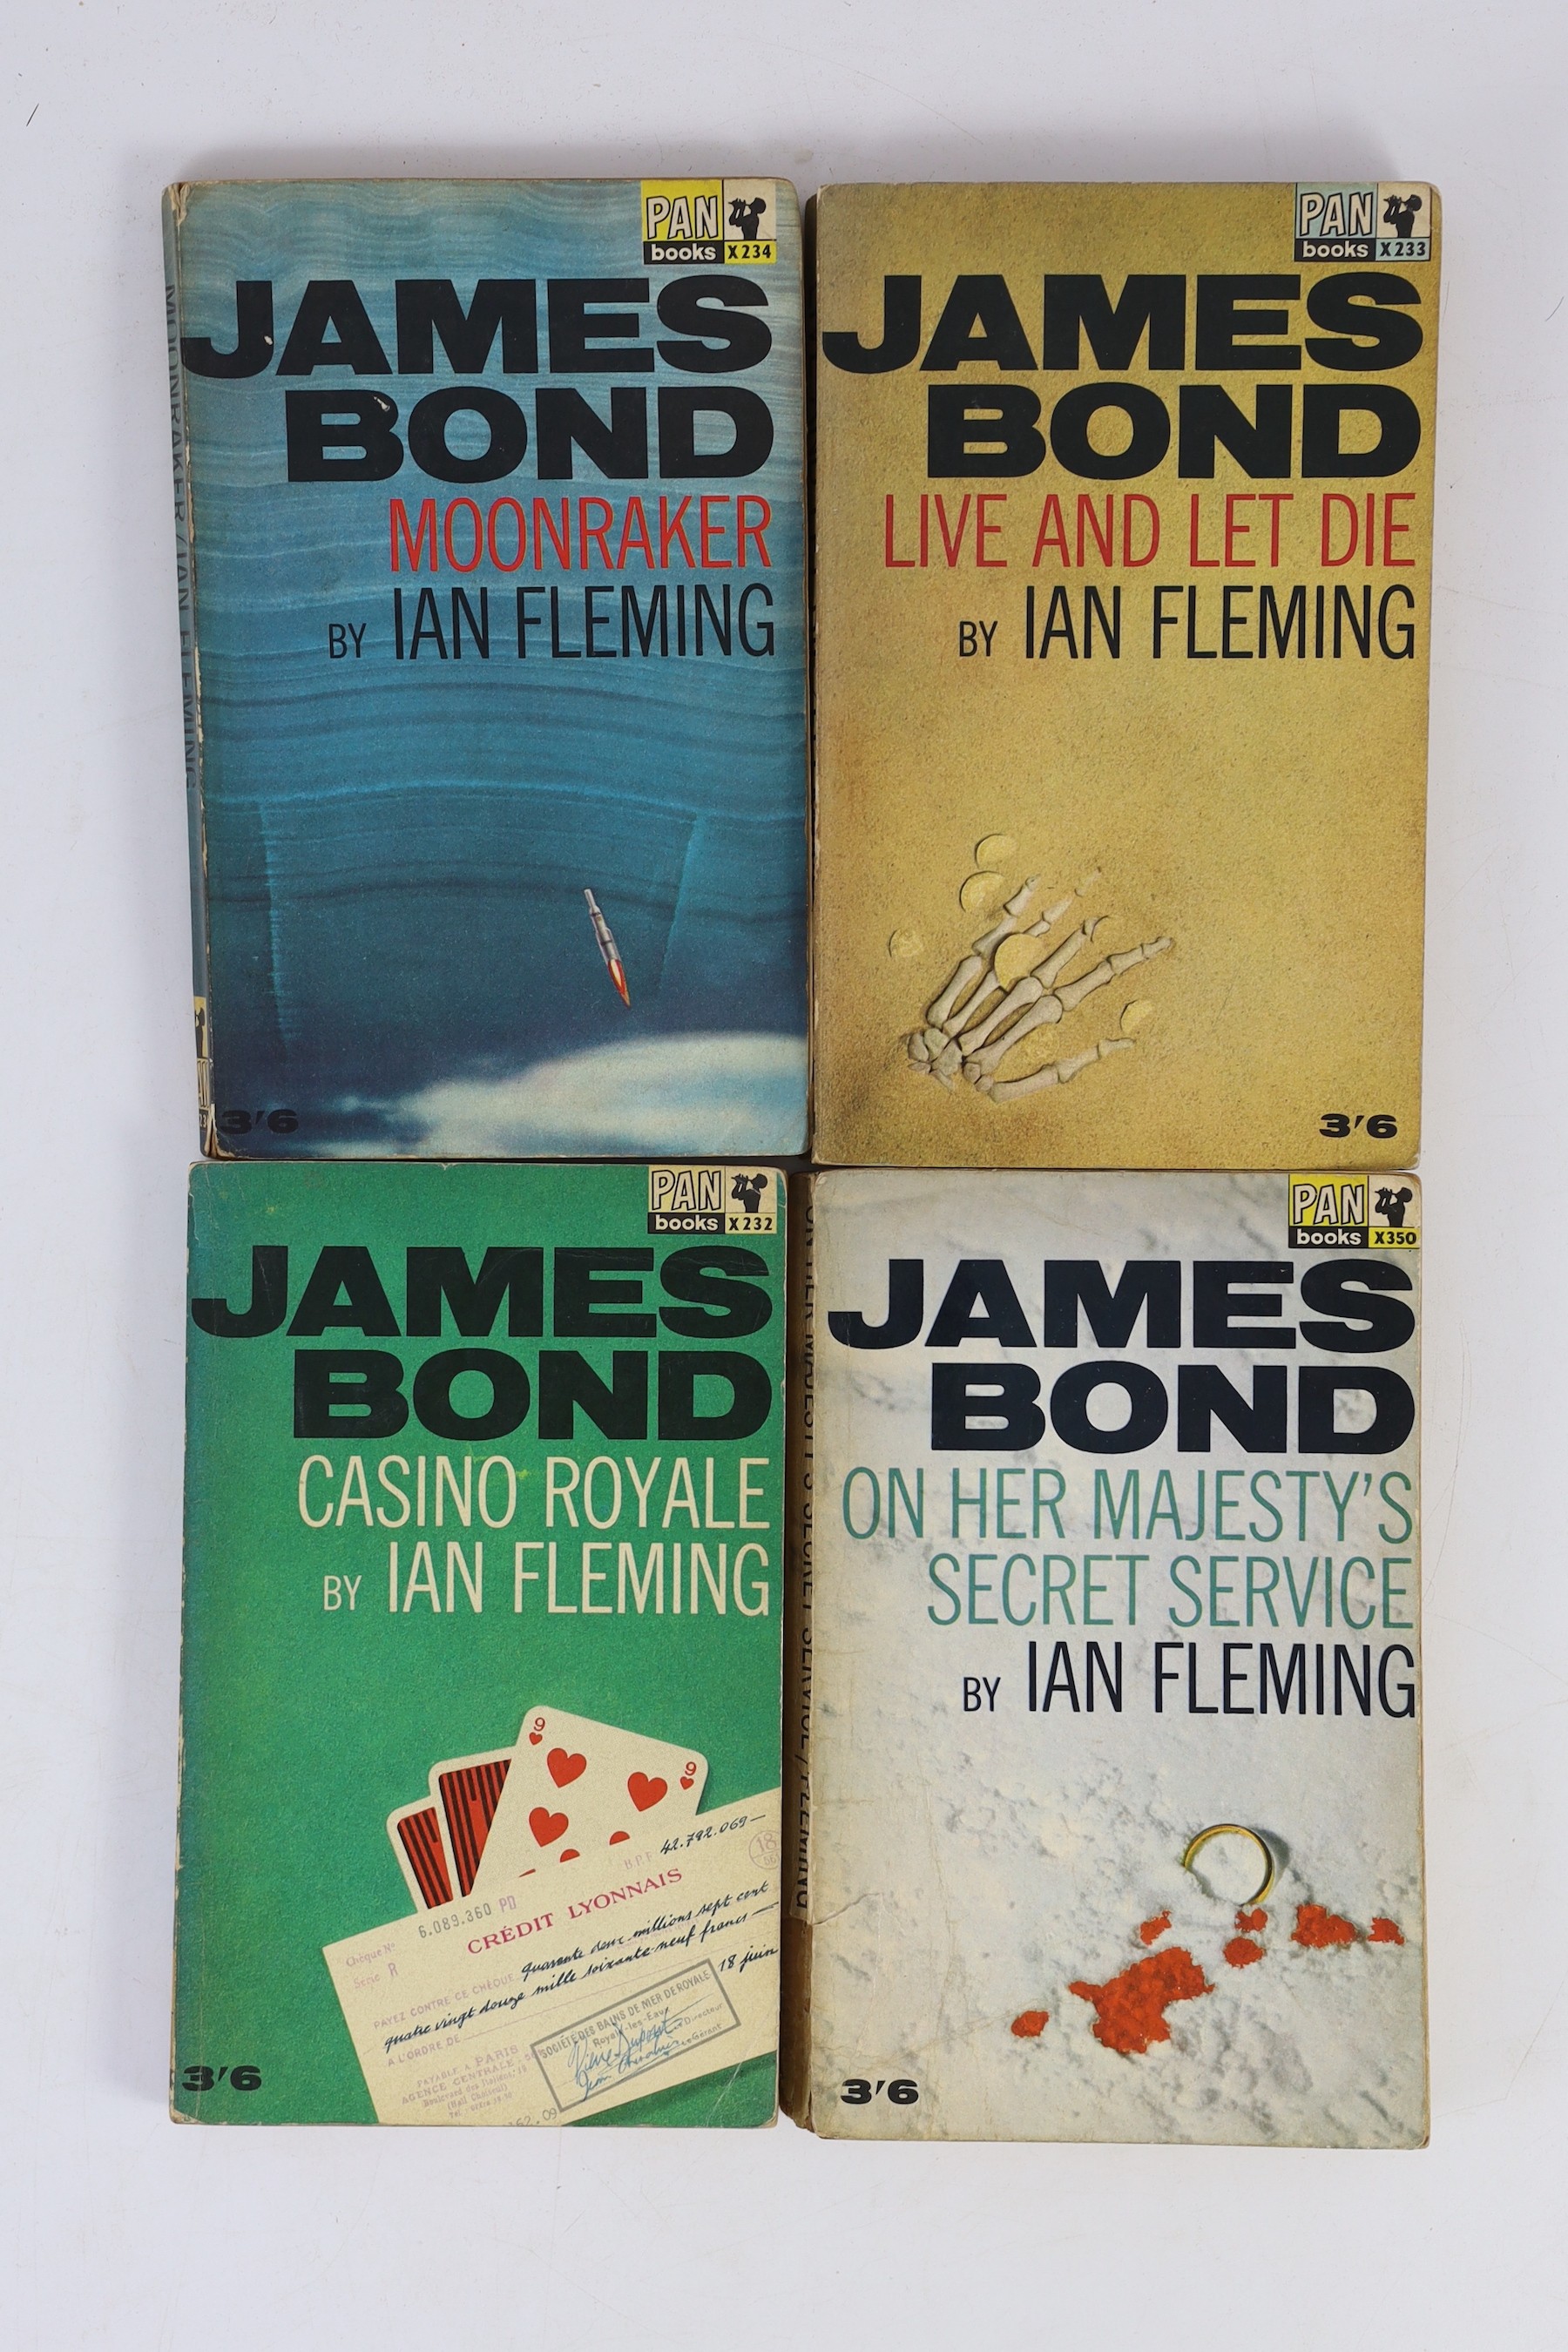 Fleming, Ian - 12 paperbacks, published by Pan Books, consisting - Casino Royale, 1964; Live and Let Die, 1965; Moonraker, 1964; Diamonds Are Forever, 1965; From Russia with Love, 1965; Dr. No, 1964; Goldfinger, 1964; Fo